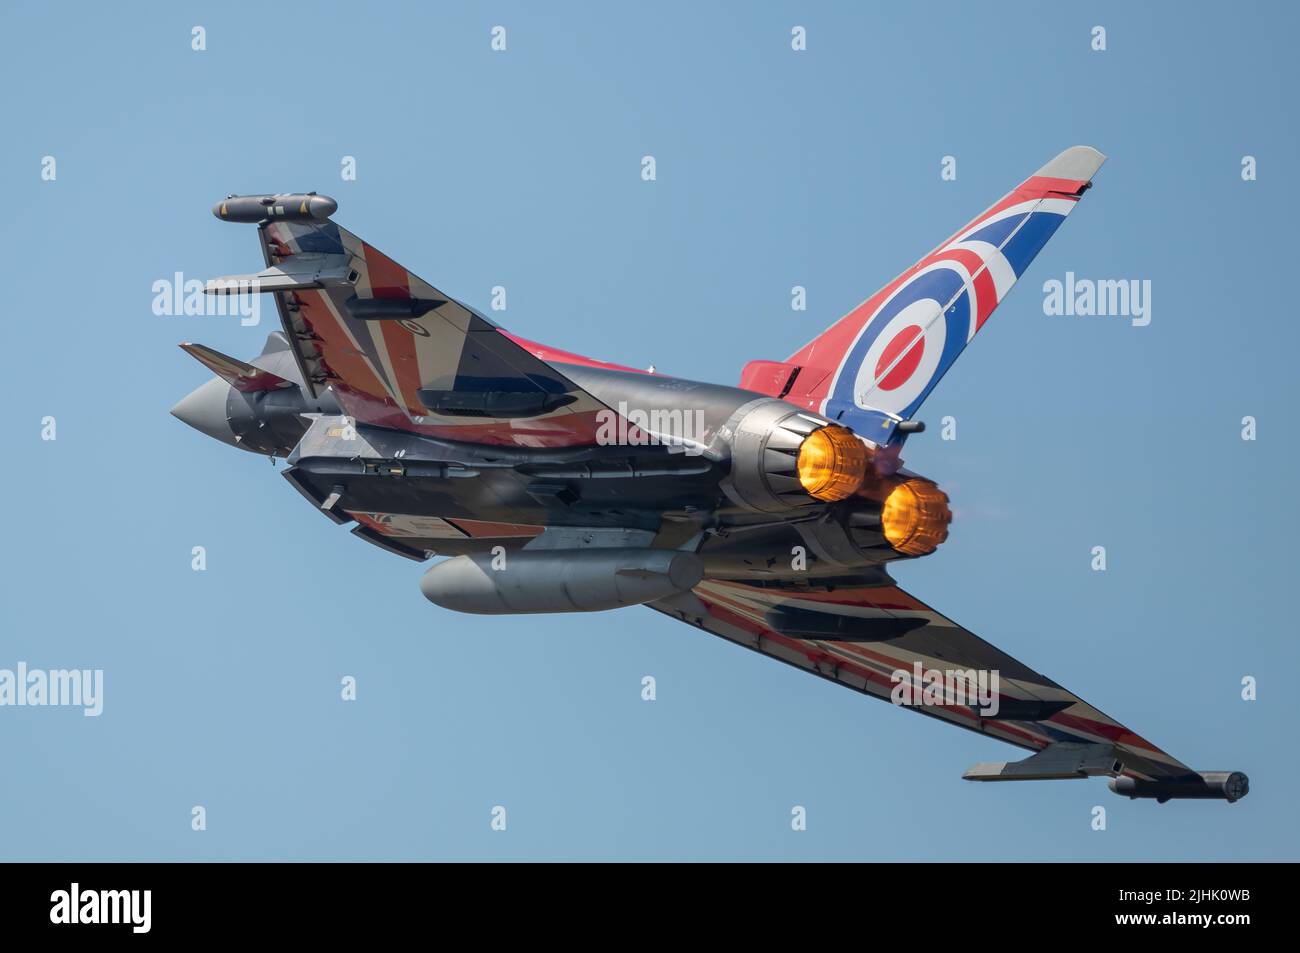 RAF Fairford, Gloucester, UK. 16 July 2022. Military aircraft of all shapes and sizes, from all eras and countries of the world, gather for one of the world’s largest airshows. Image: Eurofighter Typhoon of the RAF Display Team, No 29 Squadron sporting the British flag livery Stock Photo